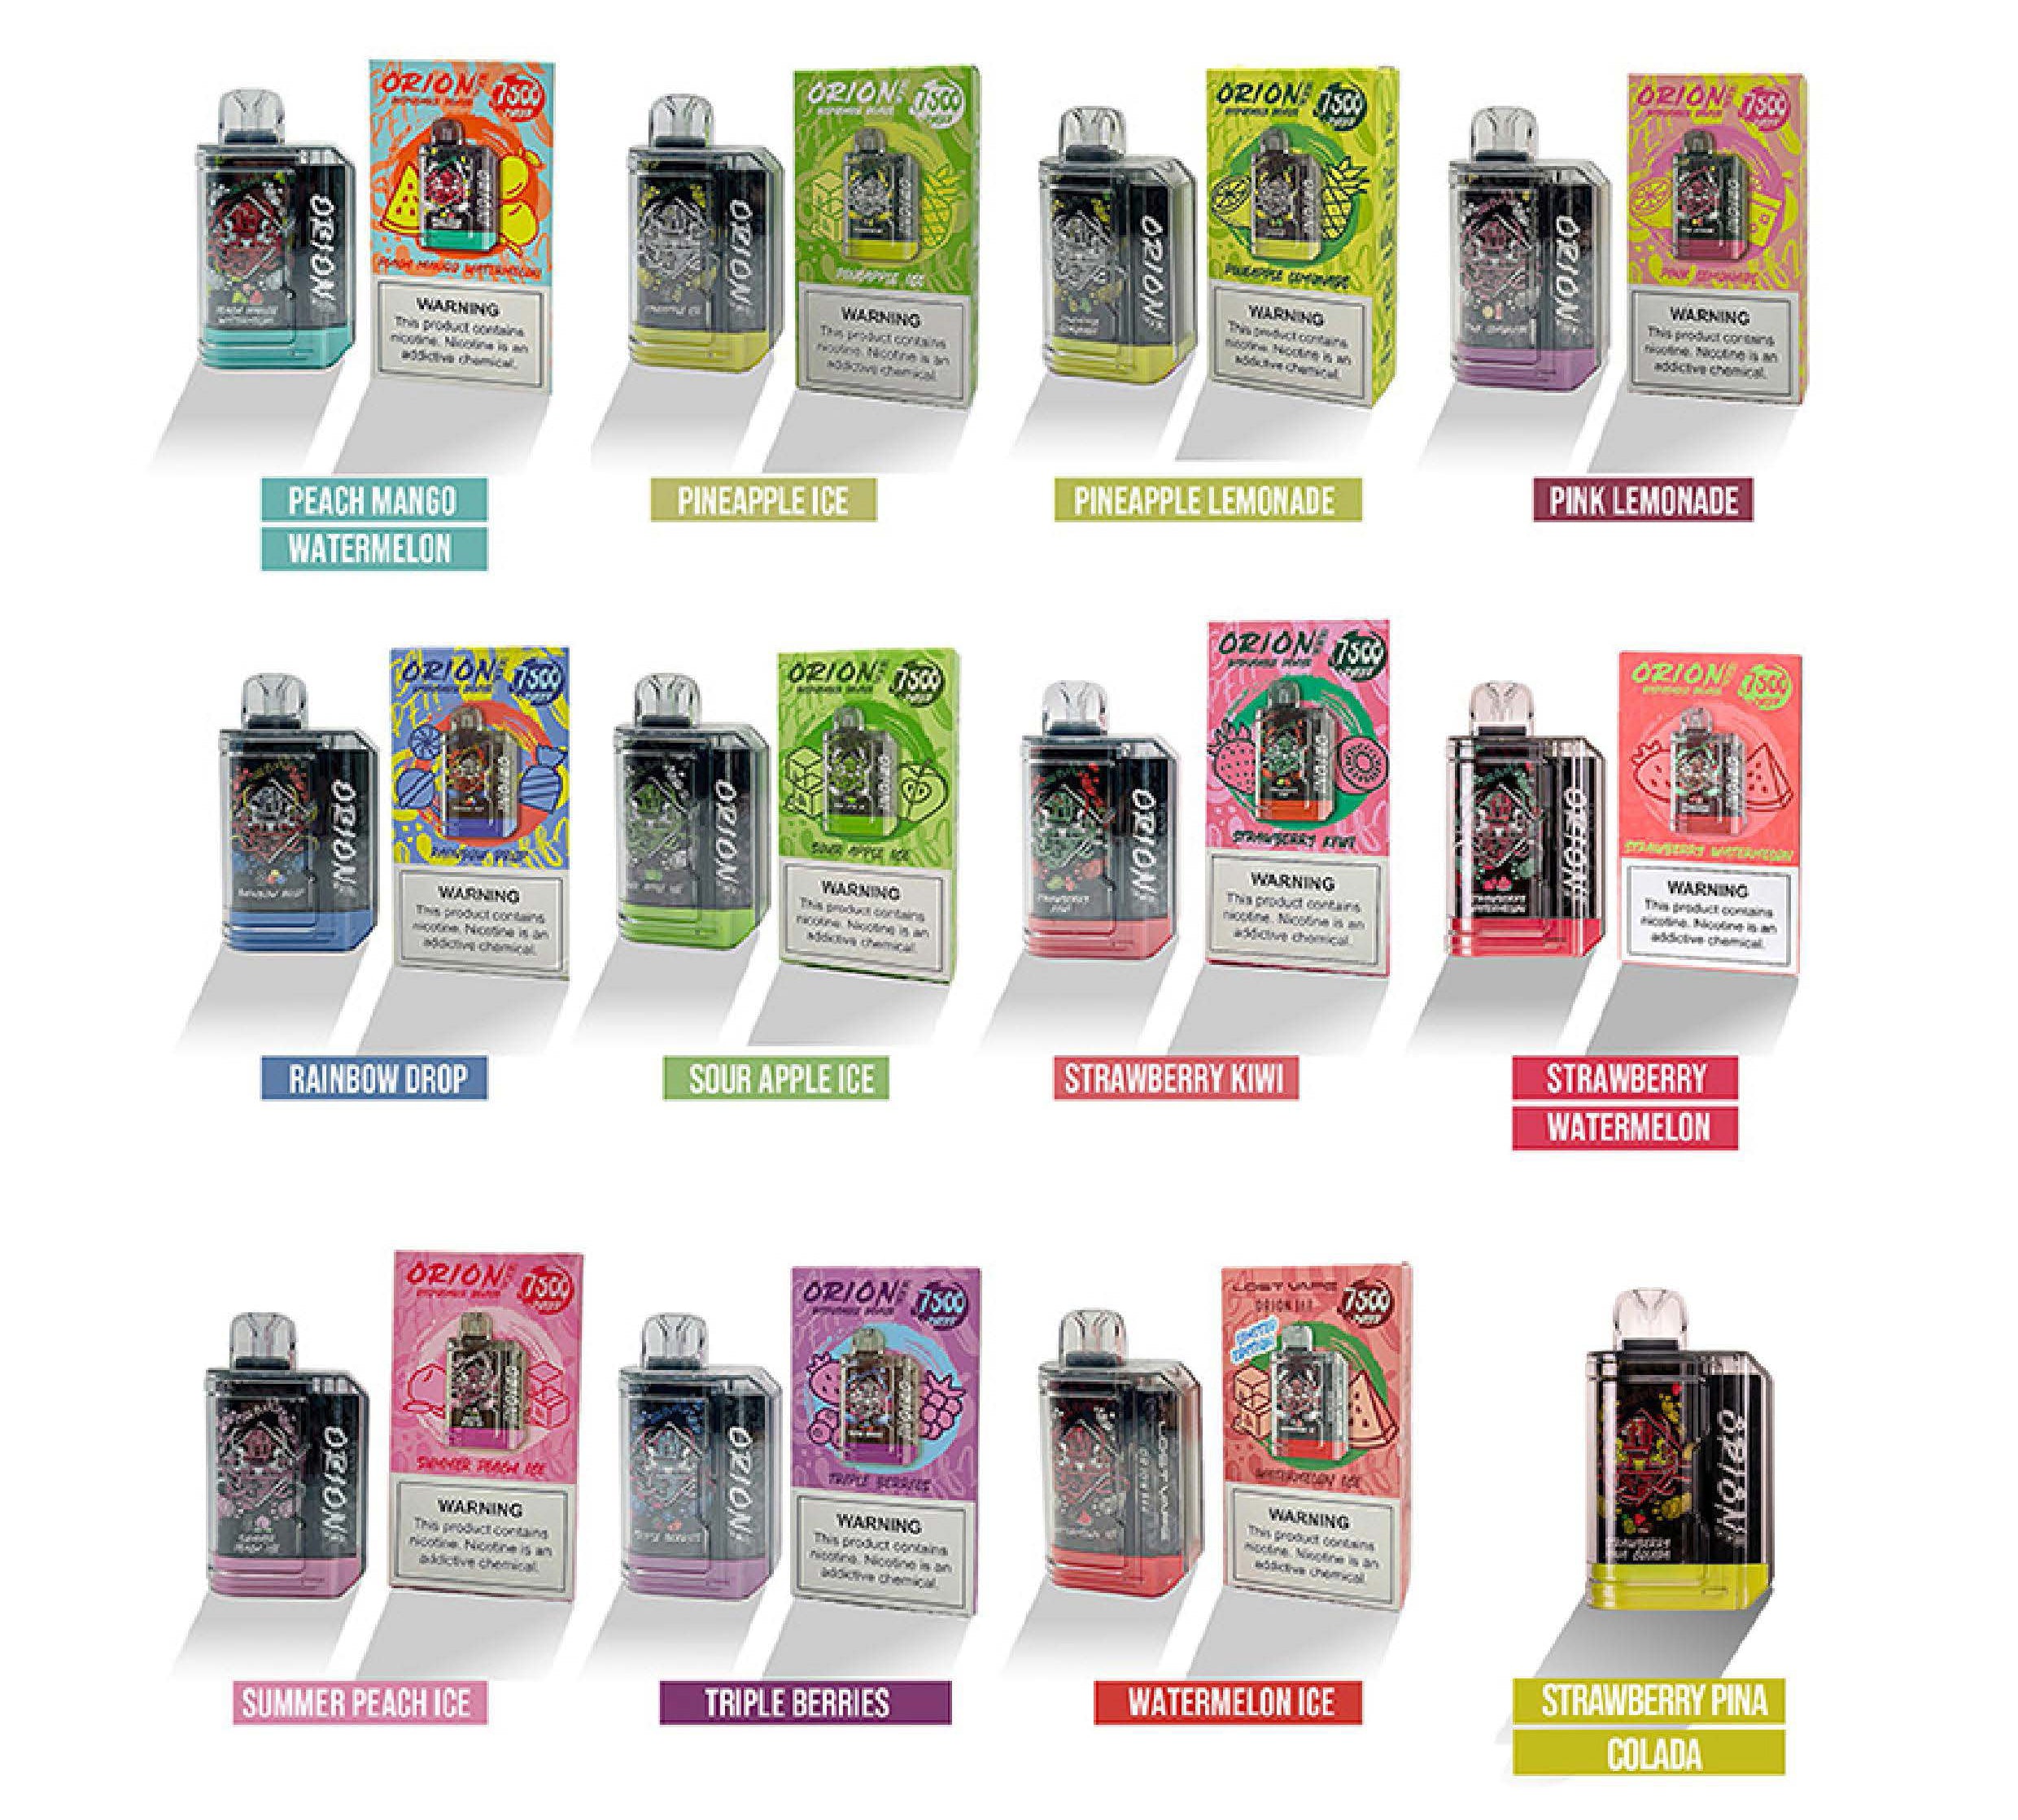 Vape Central Wholesale| Disposable |Orionbar 7500|New in